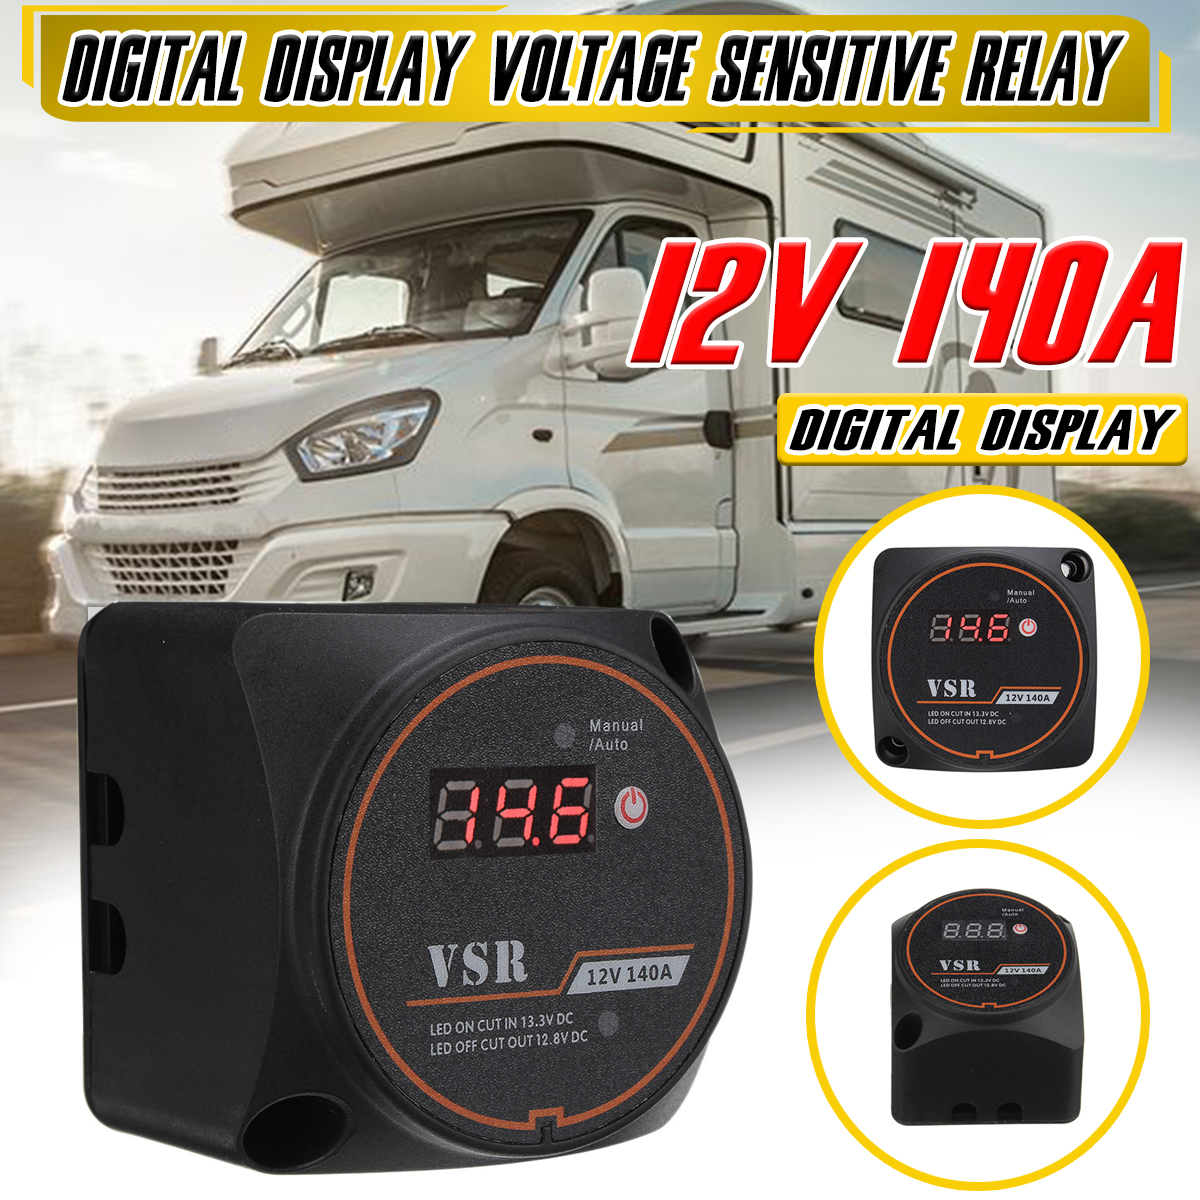 12V-140A-Automotive-Dual-Battery-Digital-Display-Isolator-Relay-Protection-Voltage-Split-Charge-Rela-1867746-1